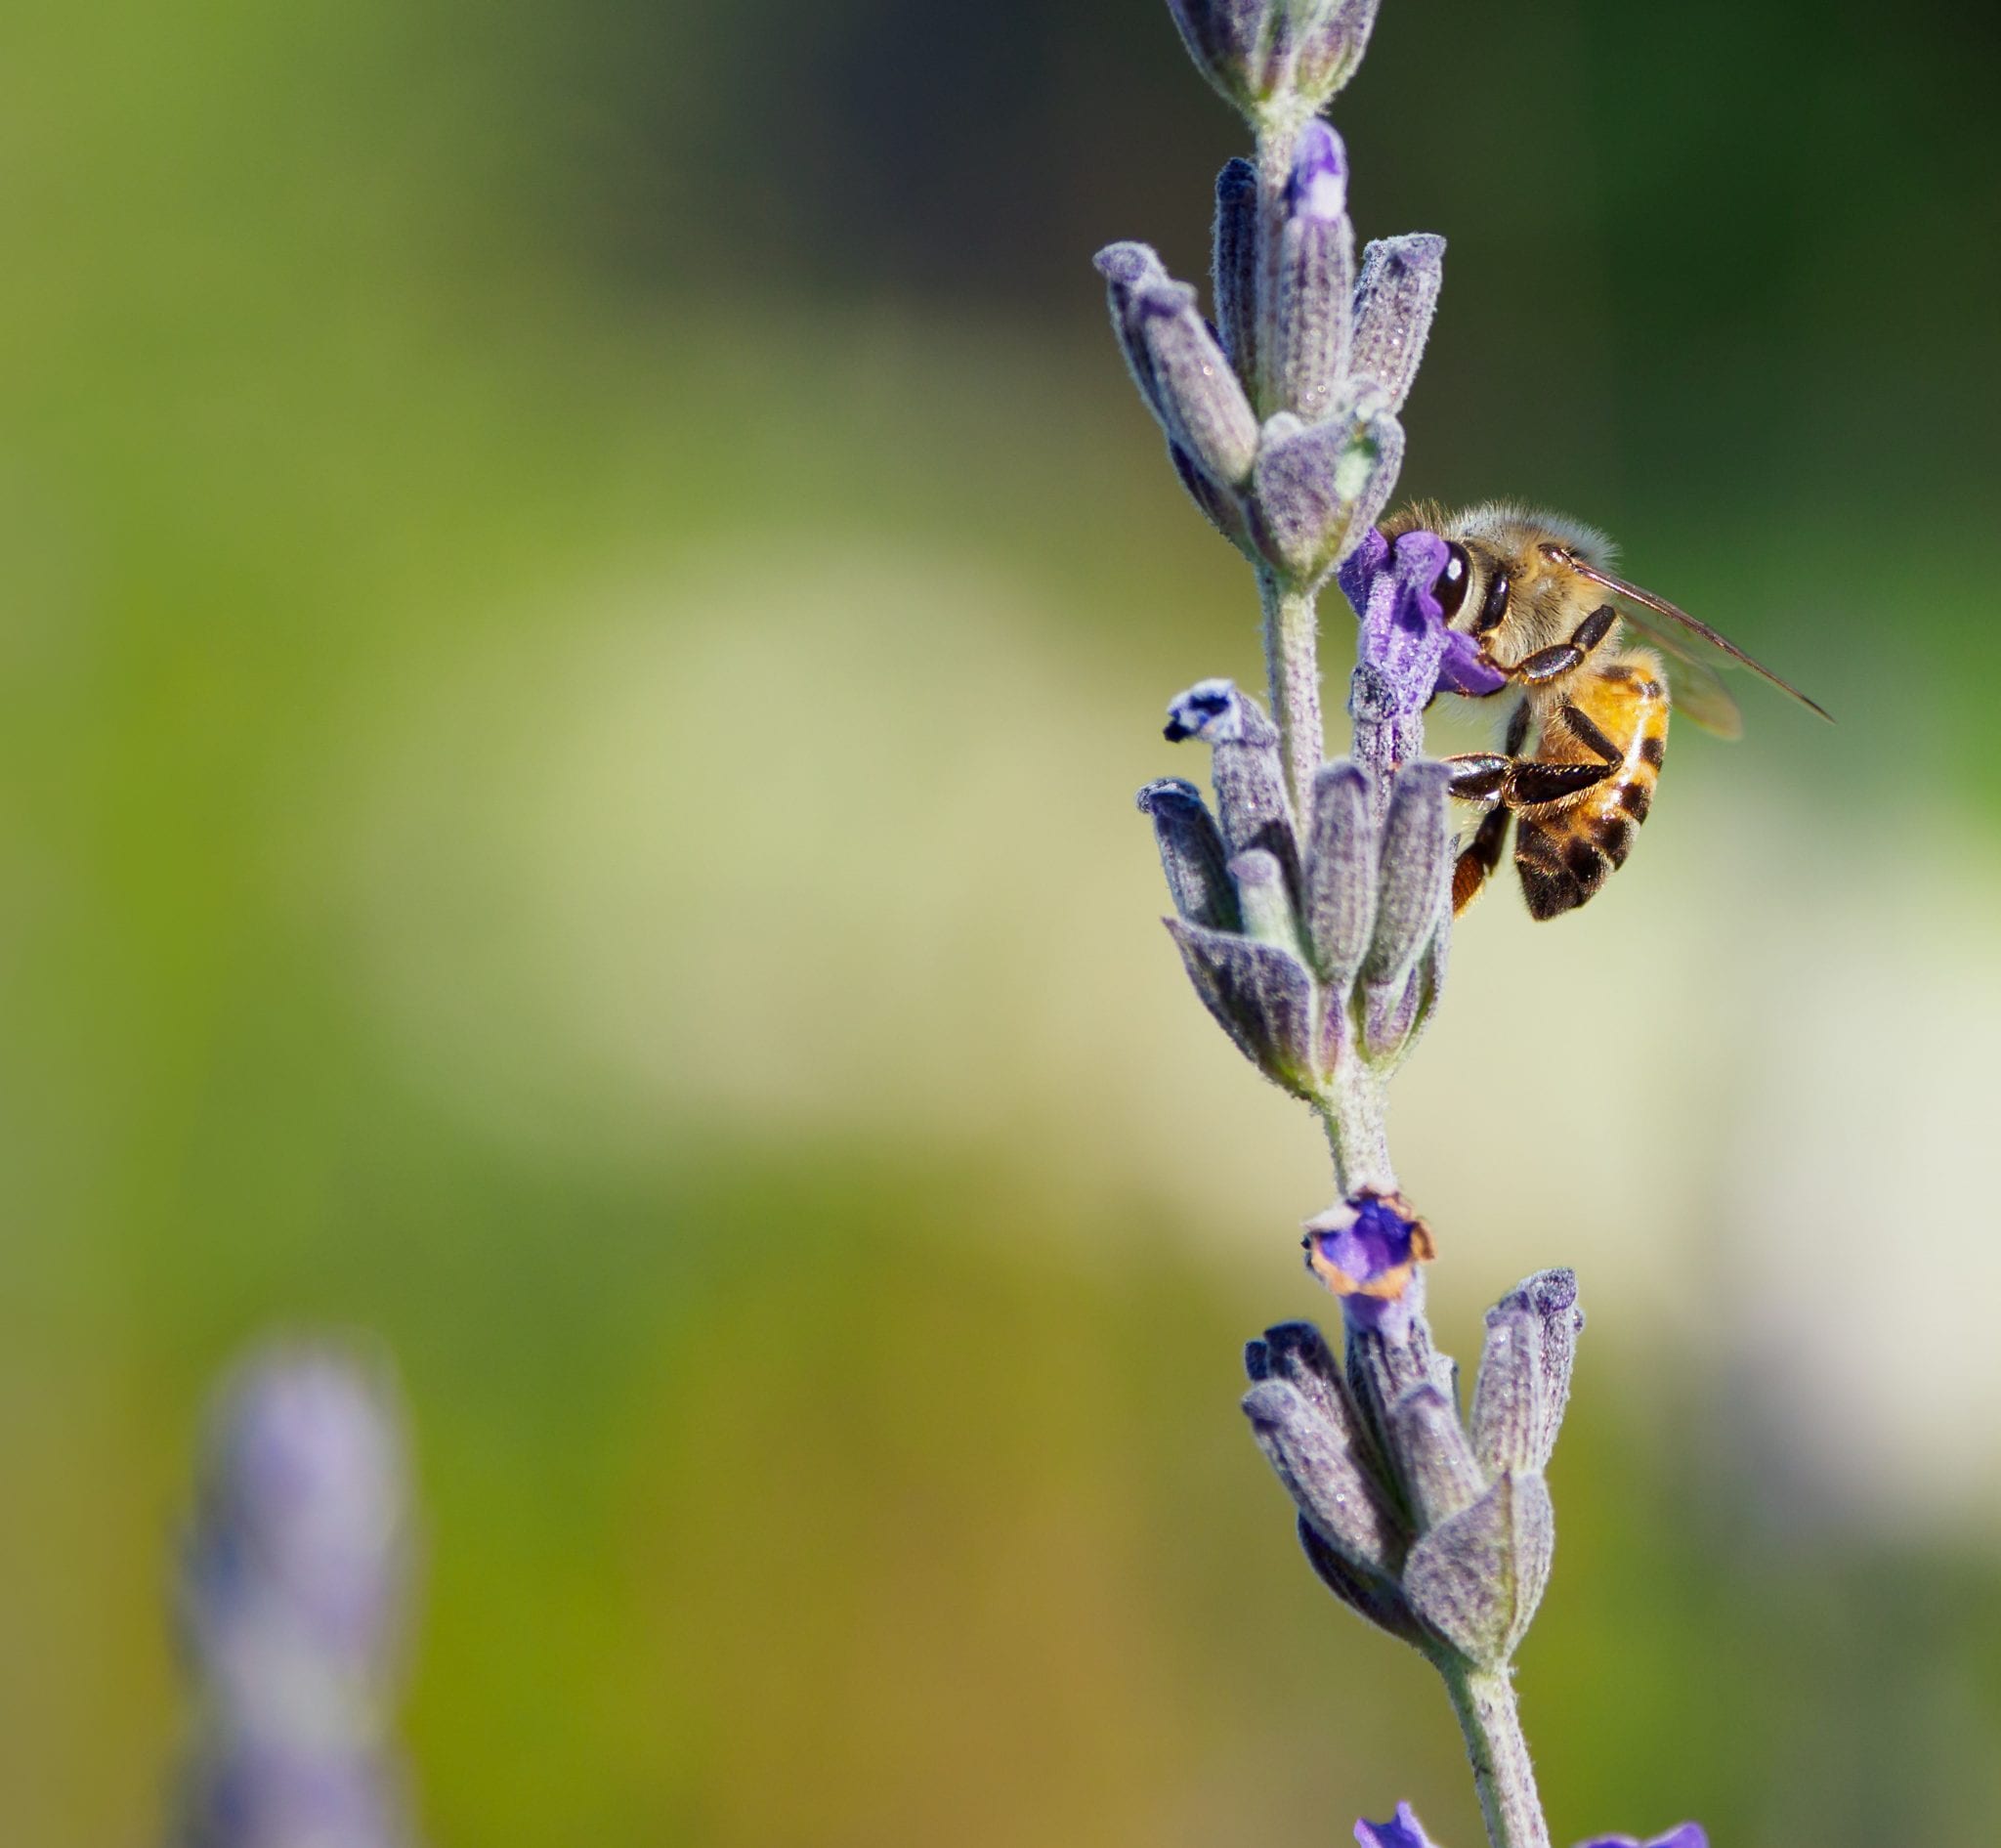 All-Ireland Pollinator Plan marks end of successful first phase